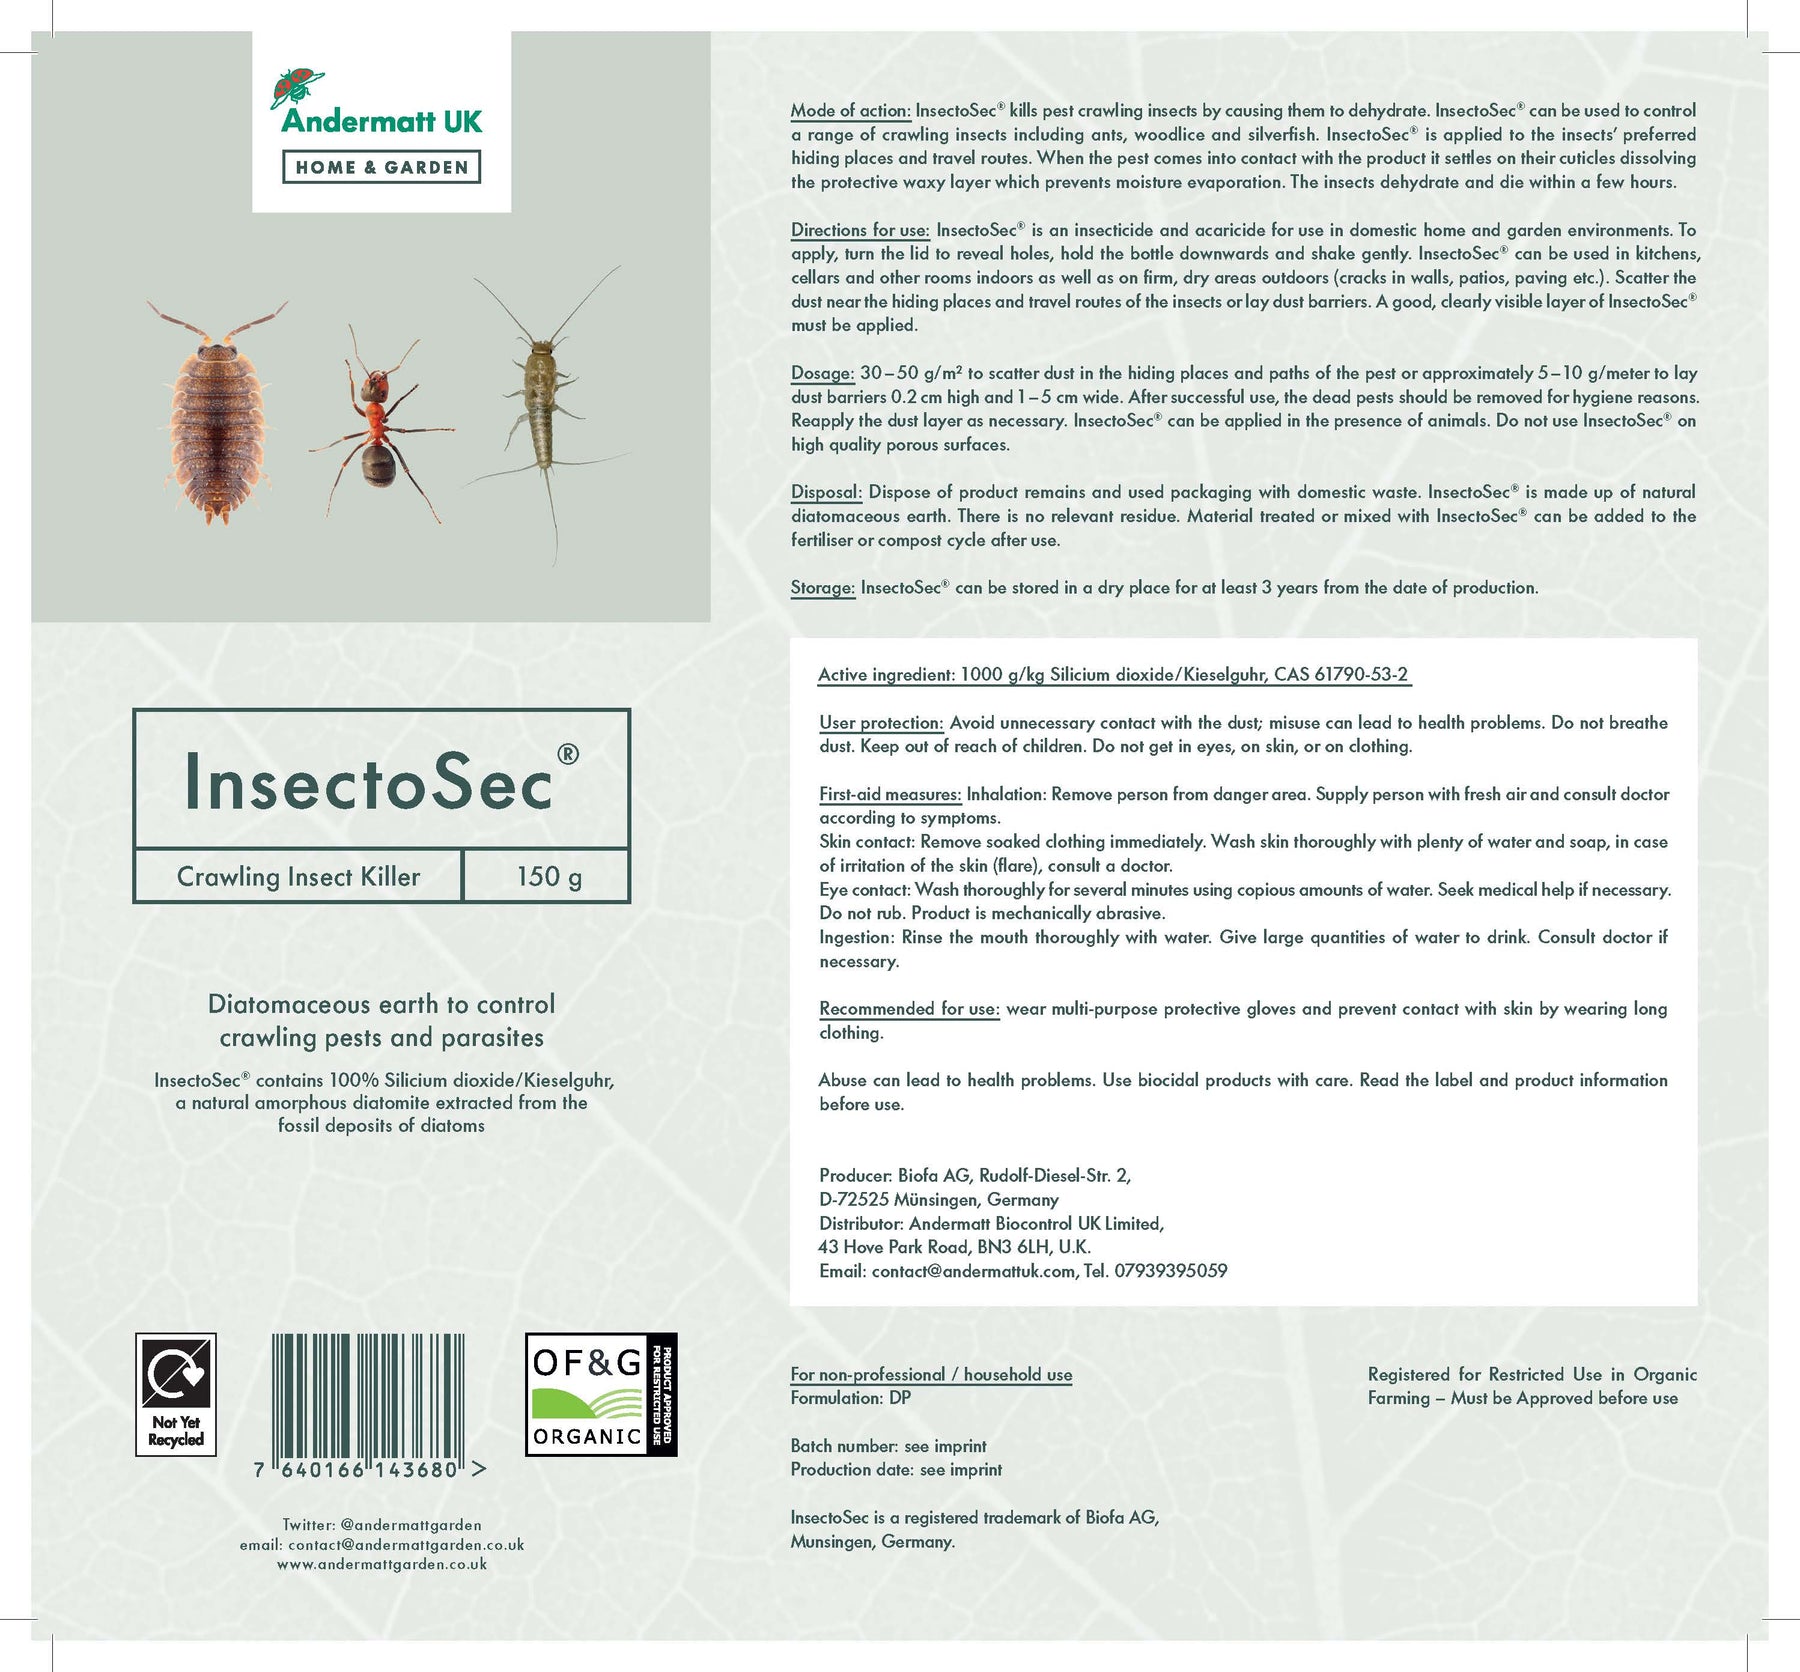 InsectoSec Crawling Insect Killer